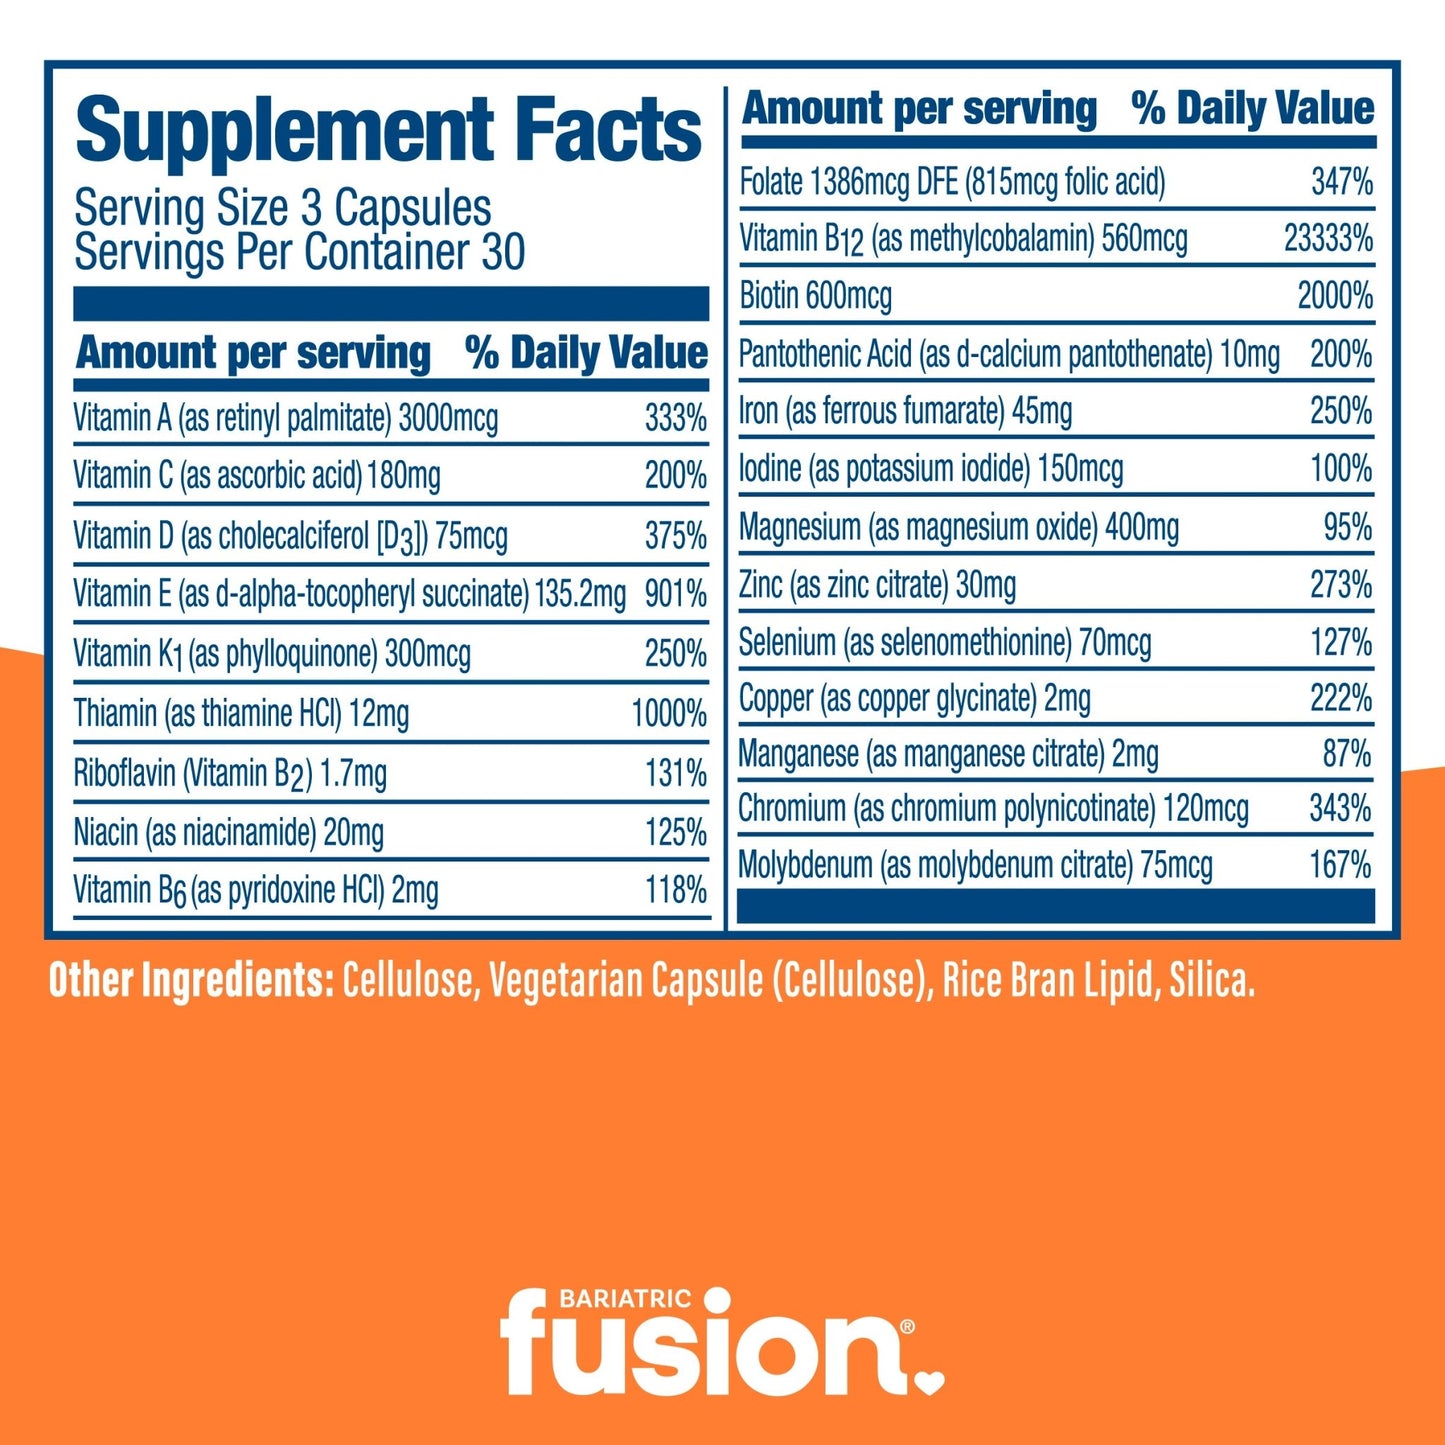 Bariatric Fusion high ADEK Multivitamin Capsules with Iron bundle supplement facts.